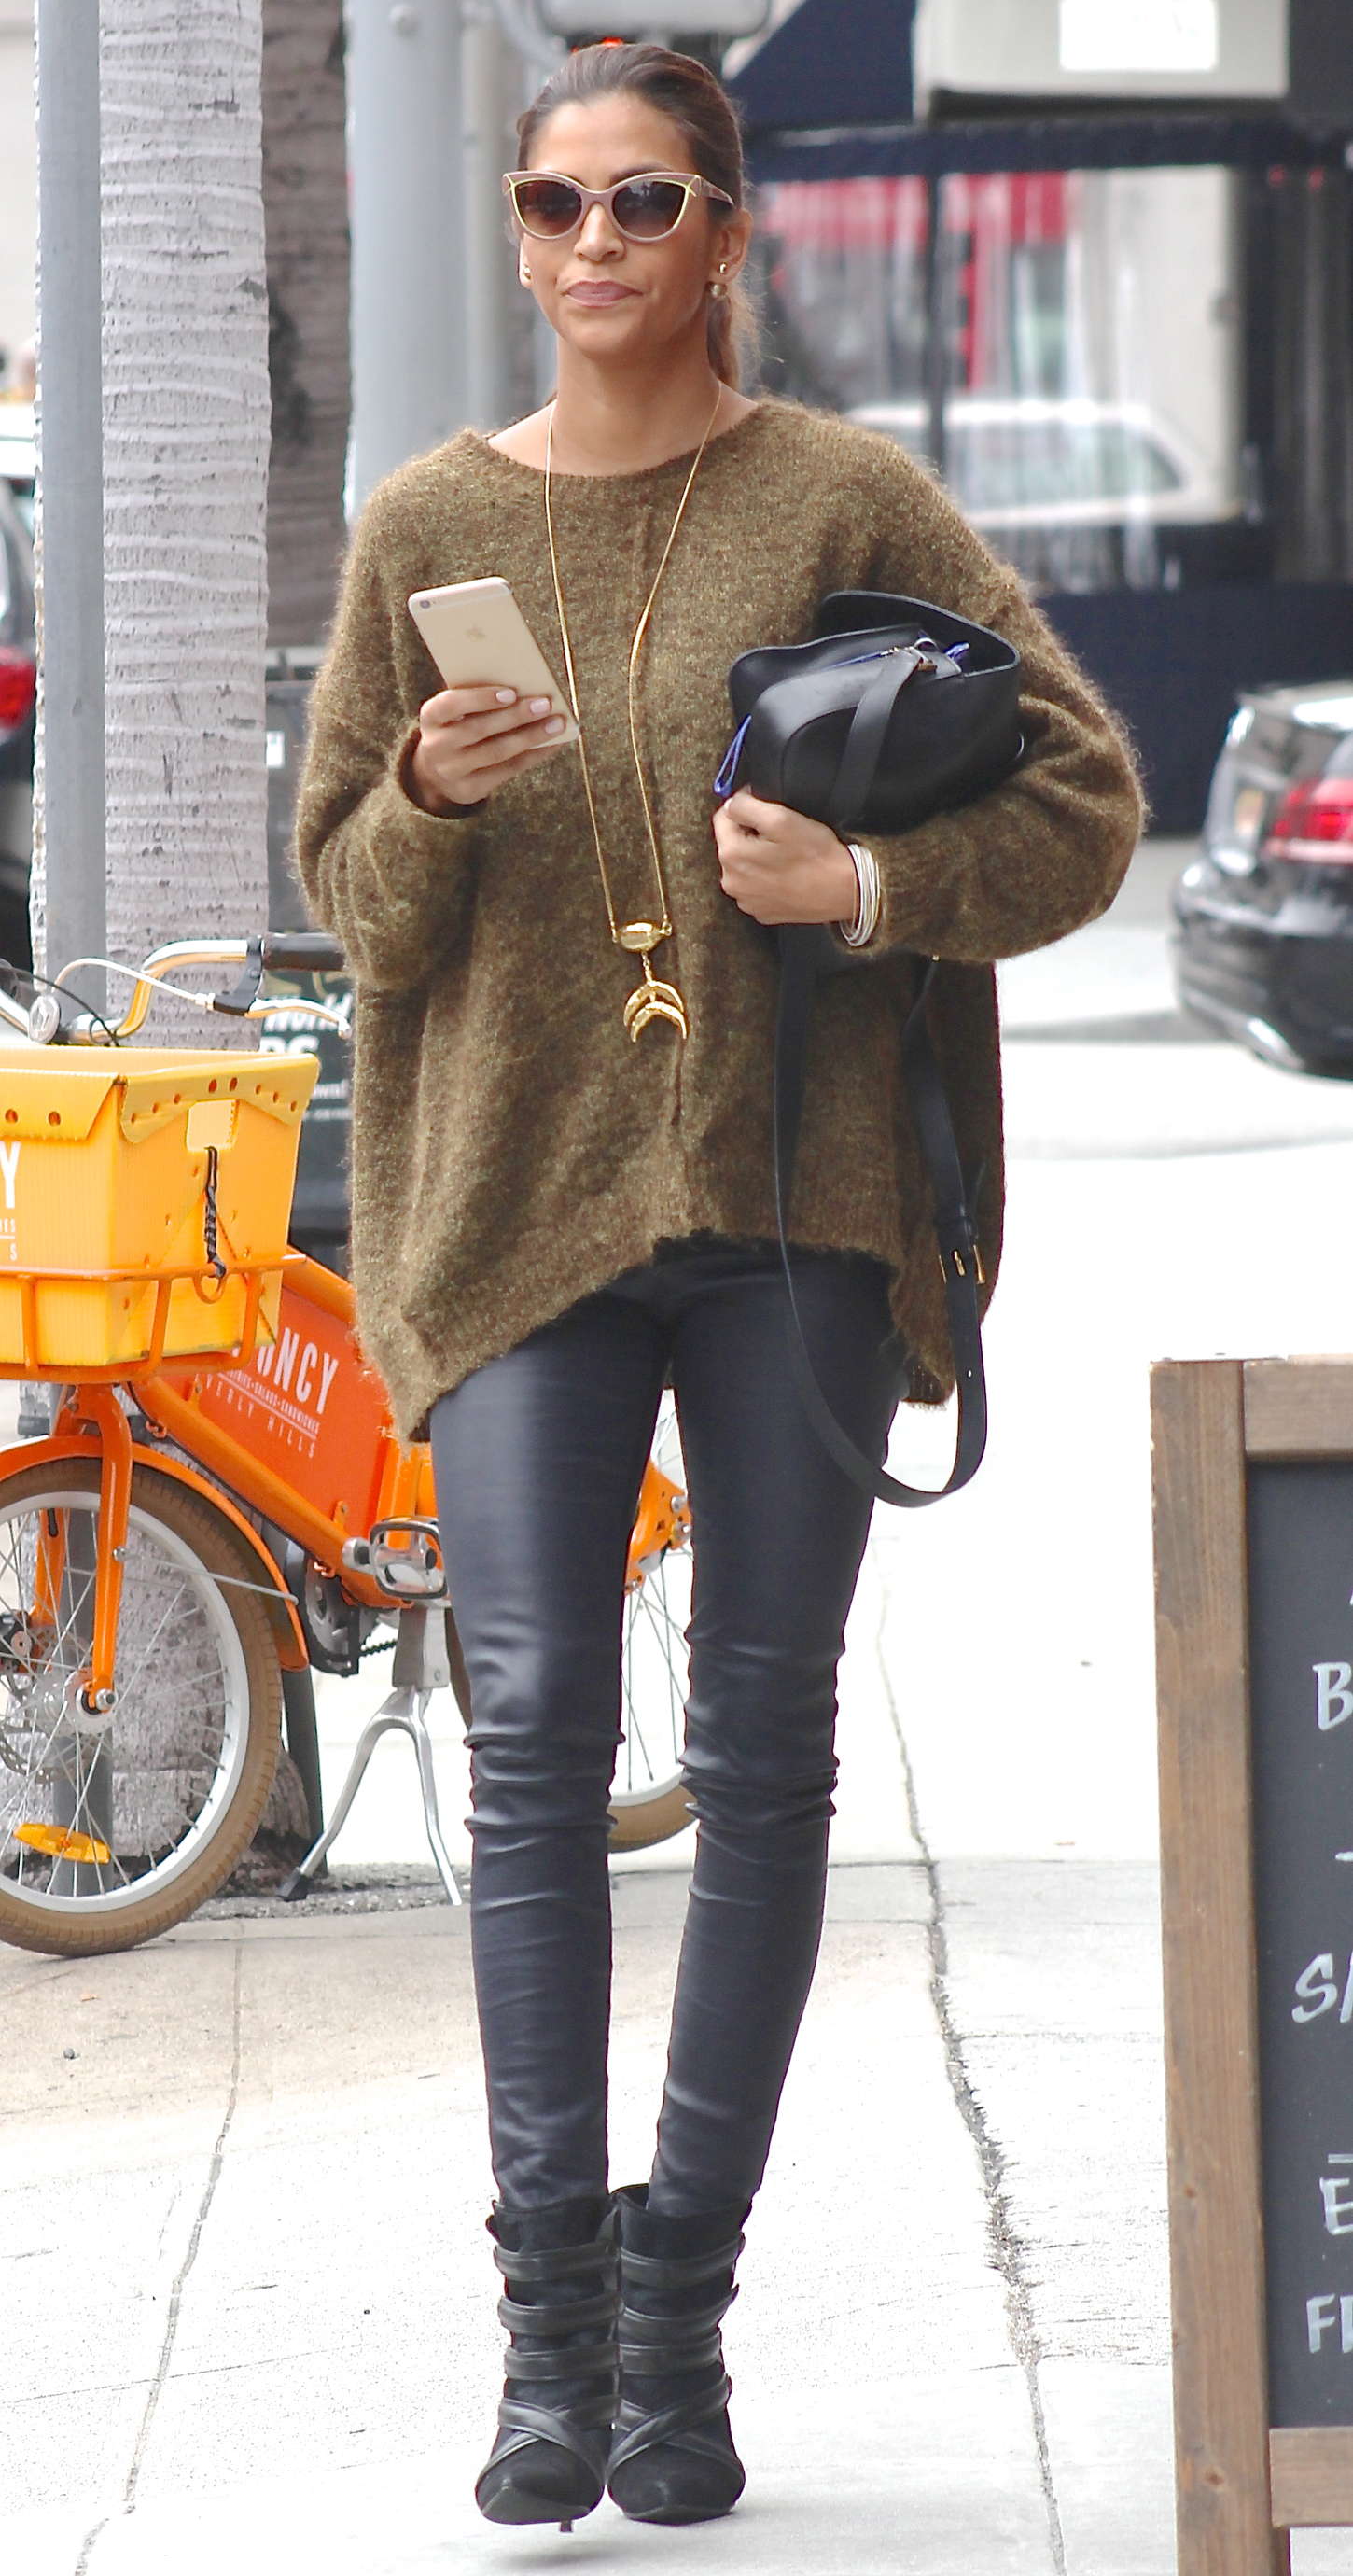 Nikki Reed out and about in Beverly Hills